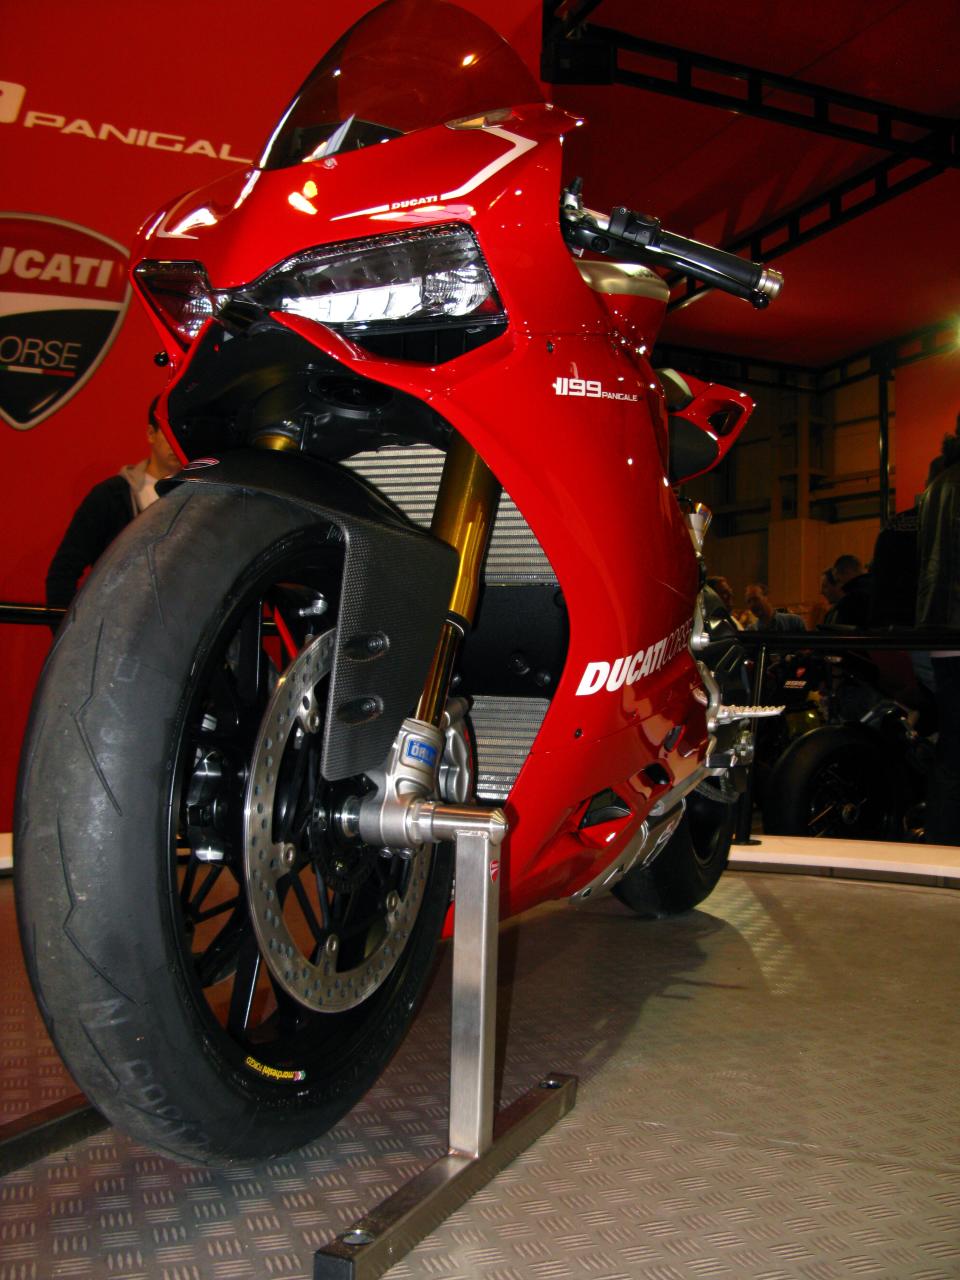 the front wheel of a red motorcycle at a motorcycle show